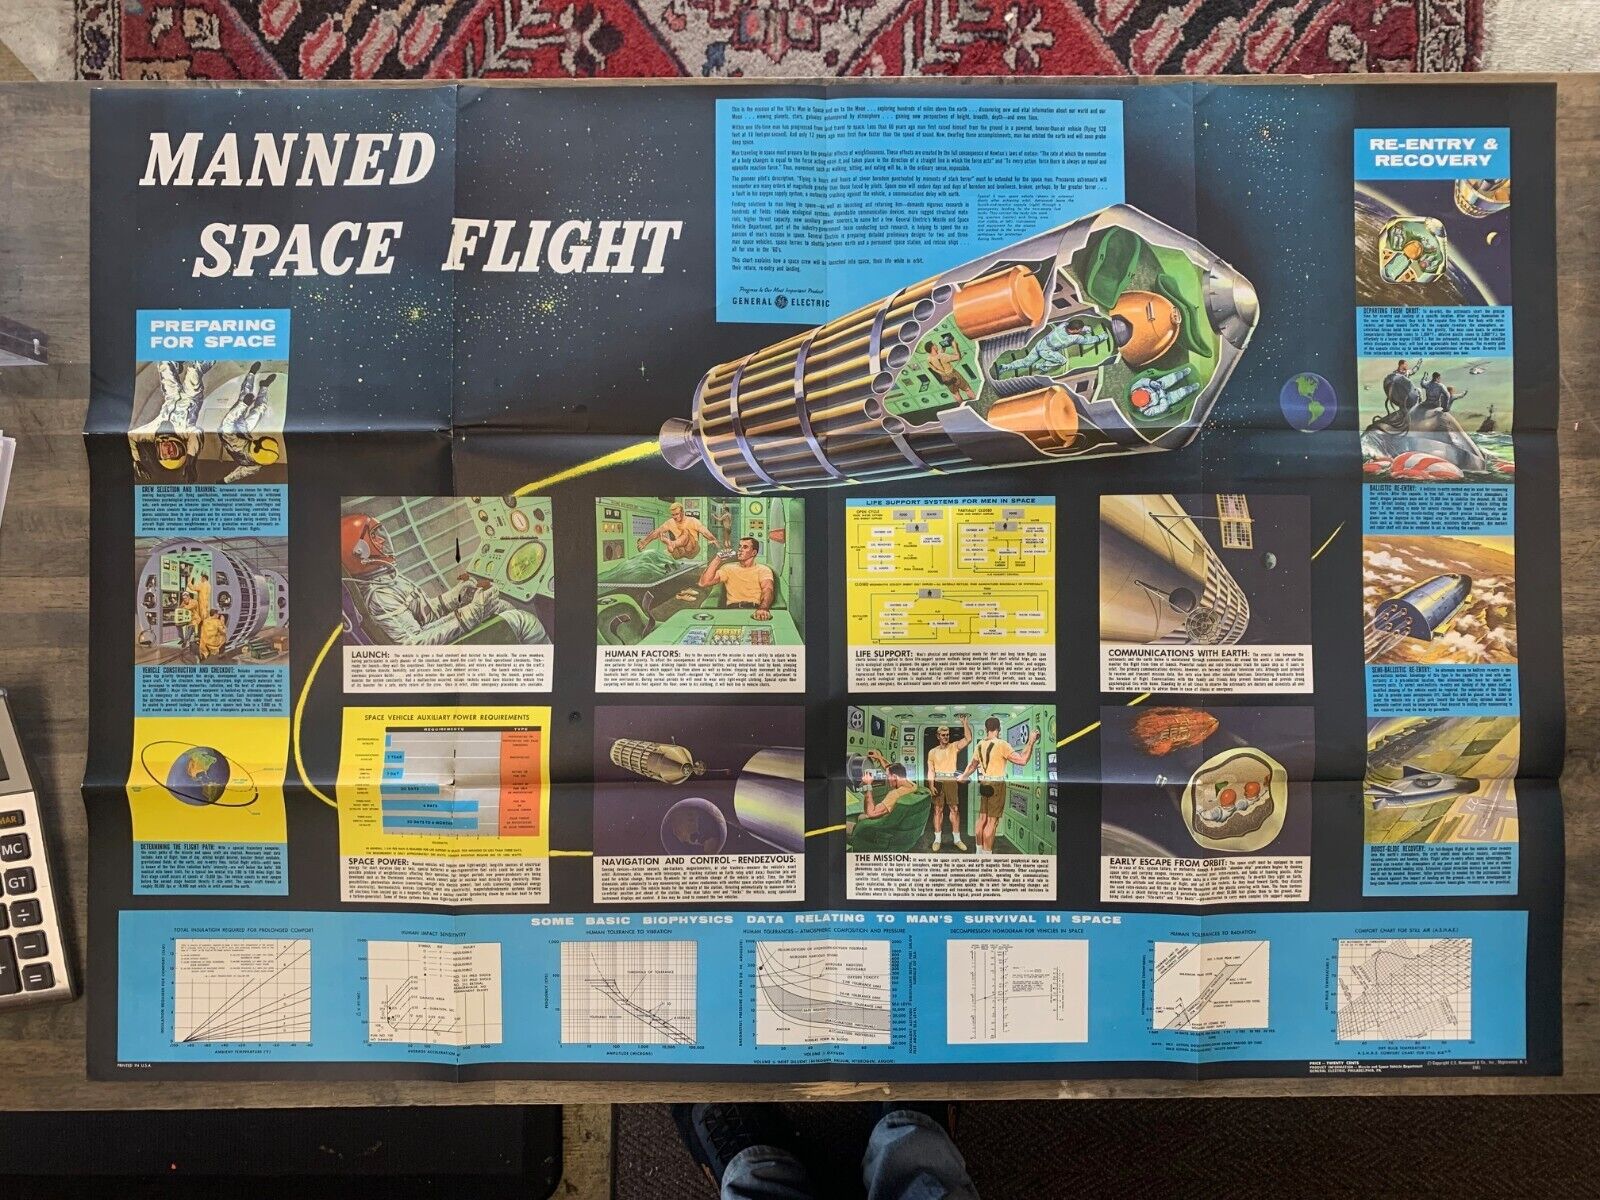 1961 MANNED SPACE FLIGHT Poster by G.E.